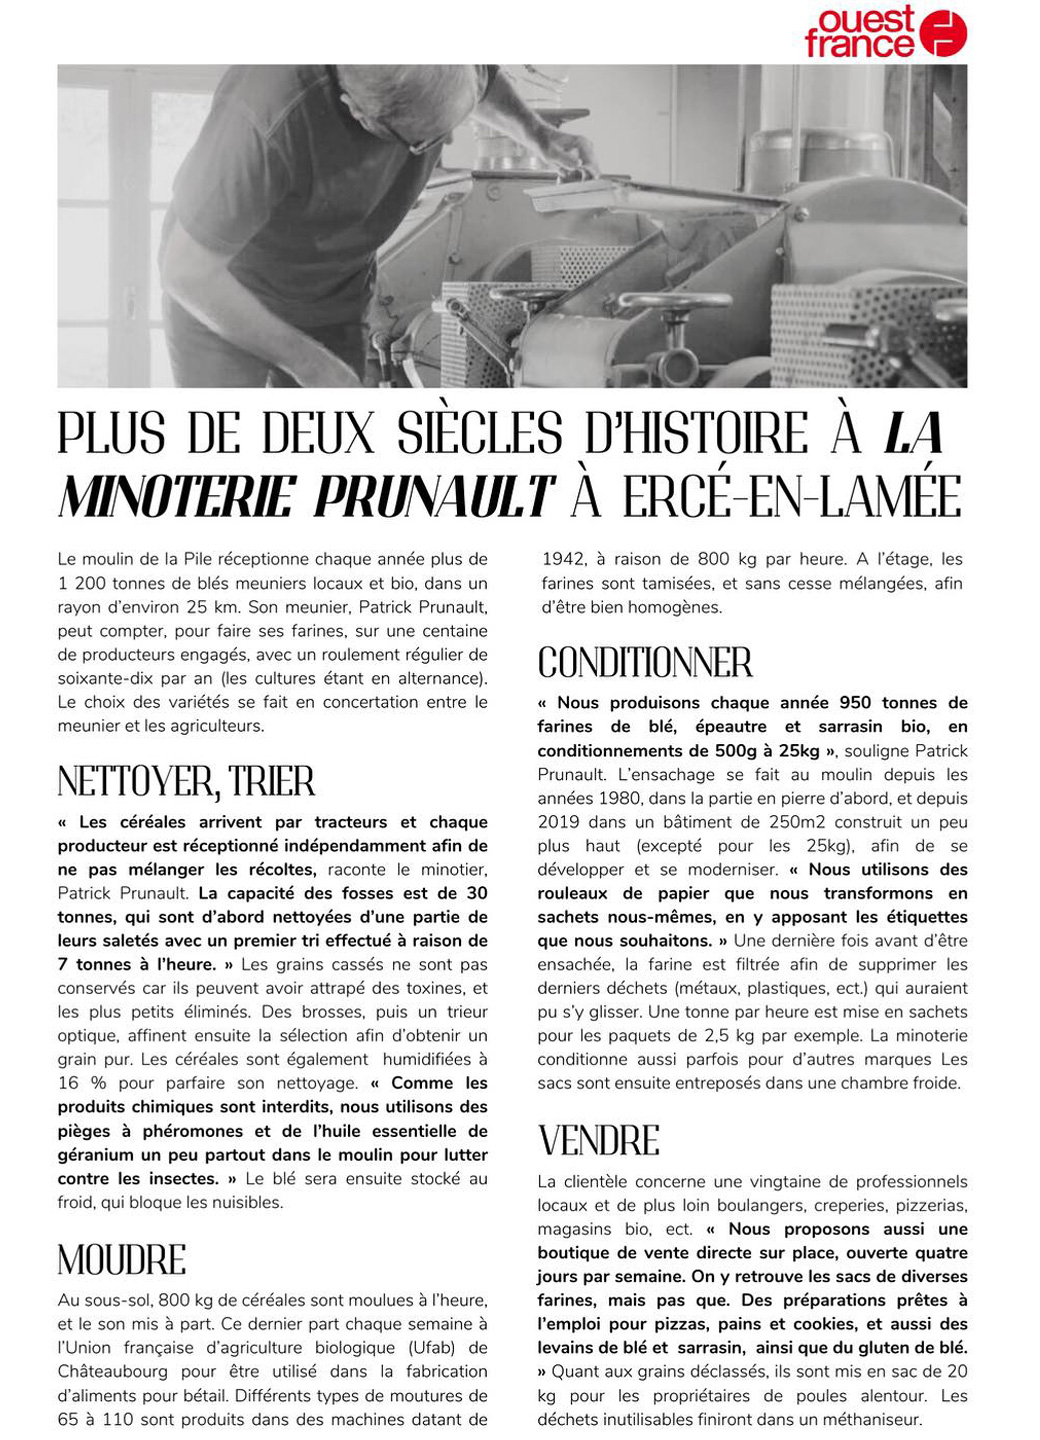 Article Ouest France Minoterie Prunault